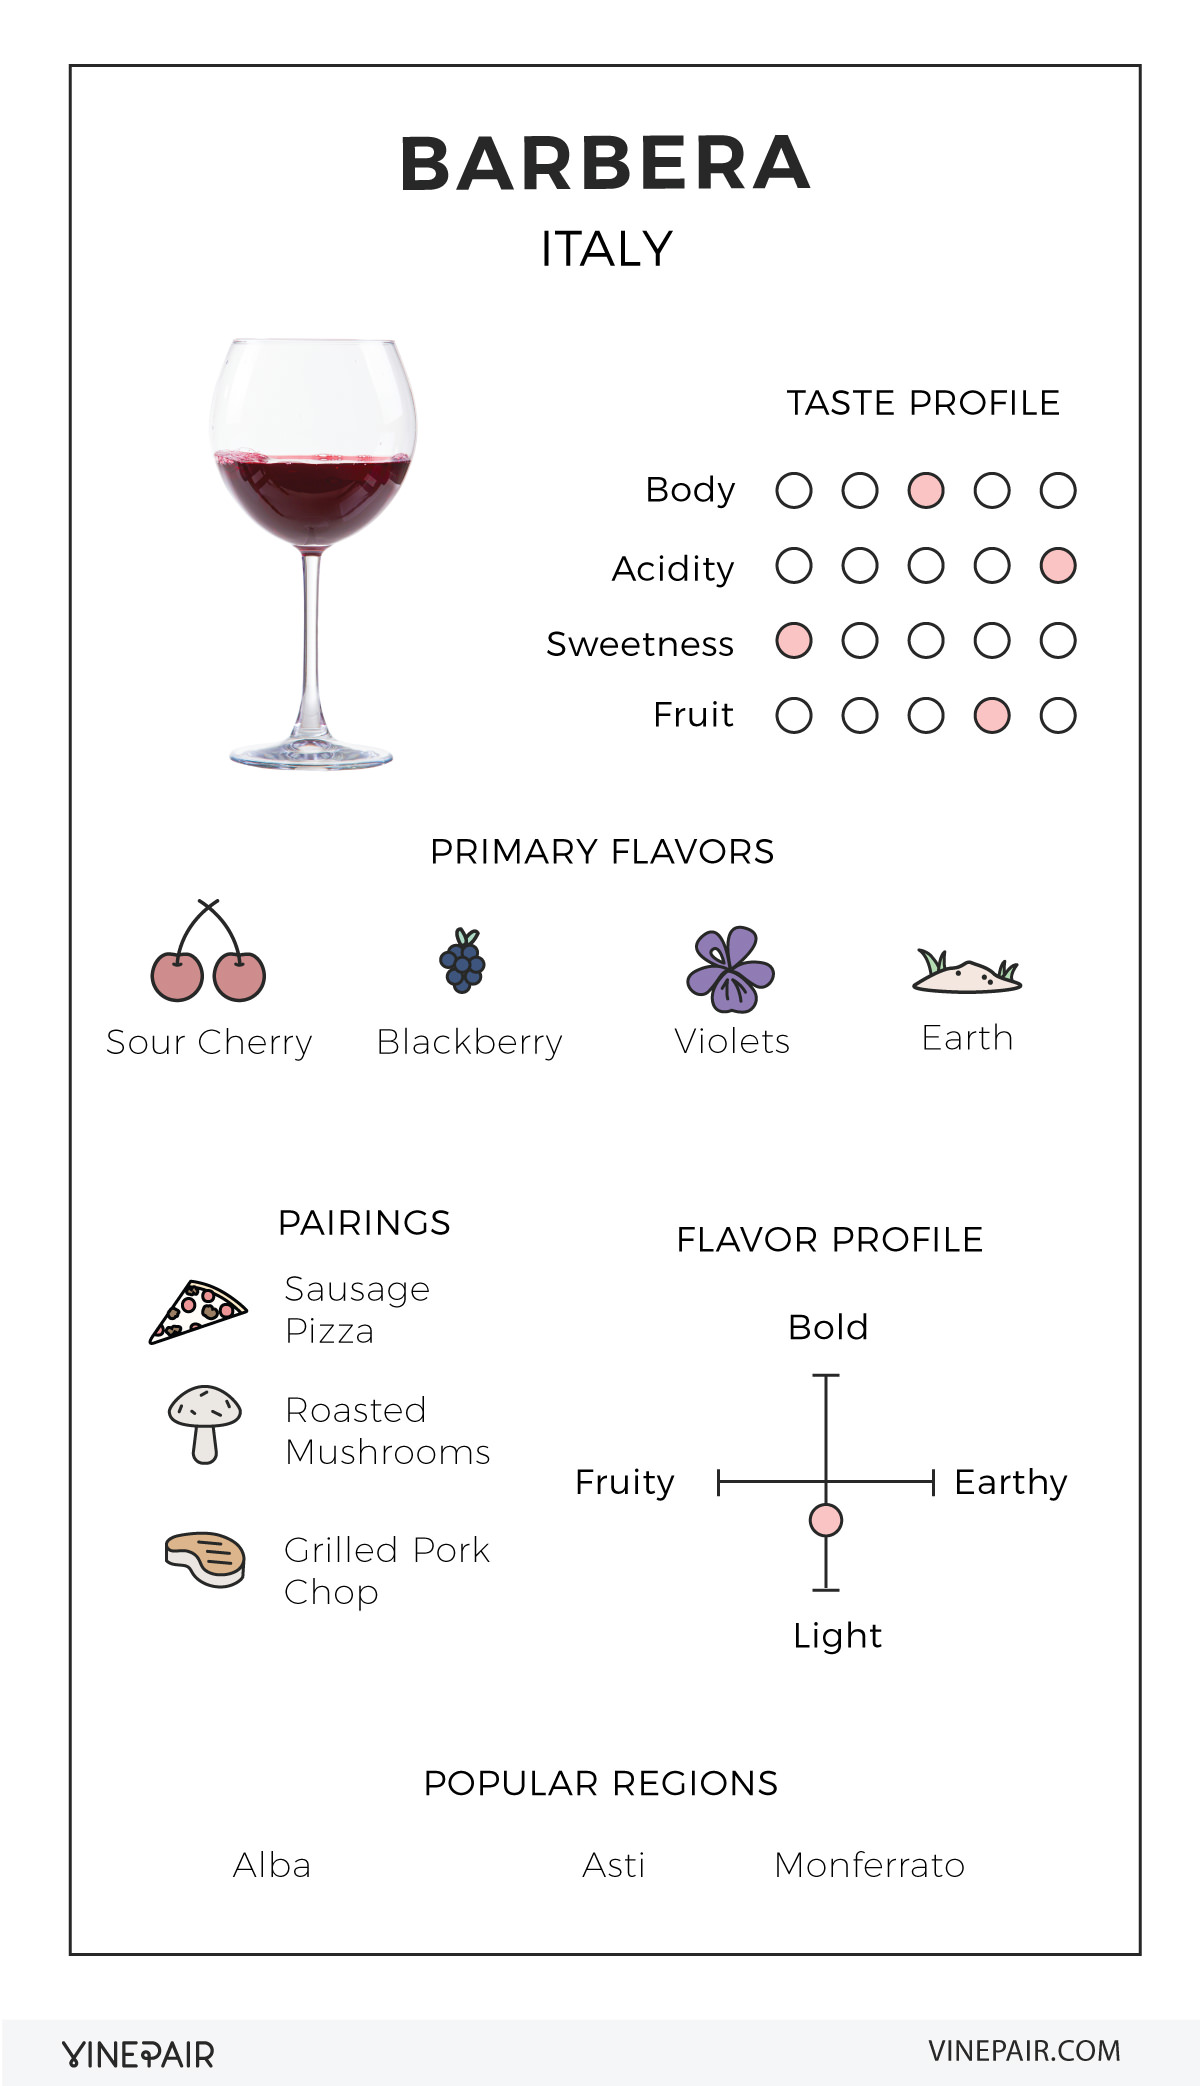 An Illustrated Guide to Barbera from Italy